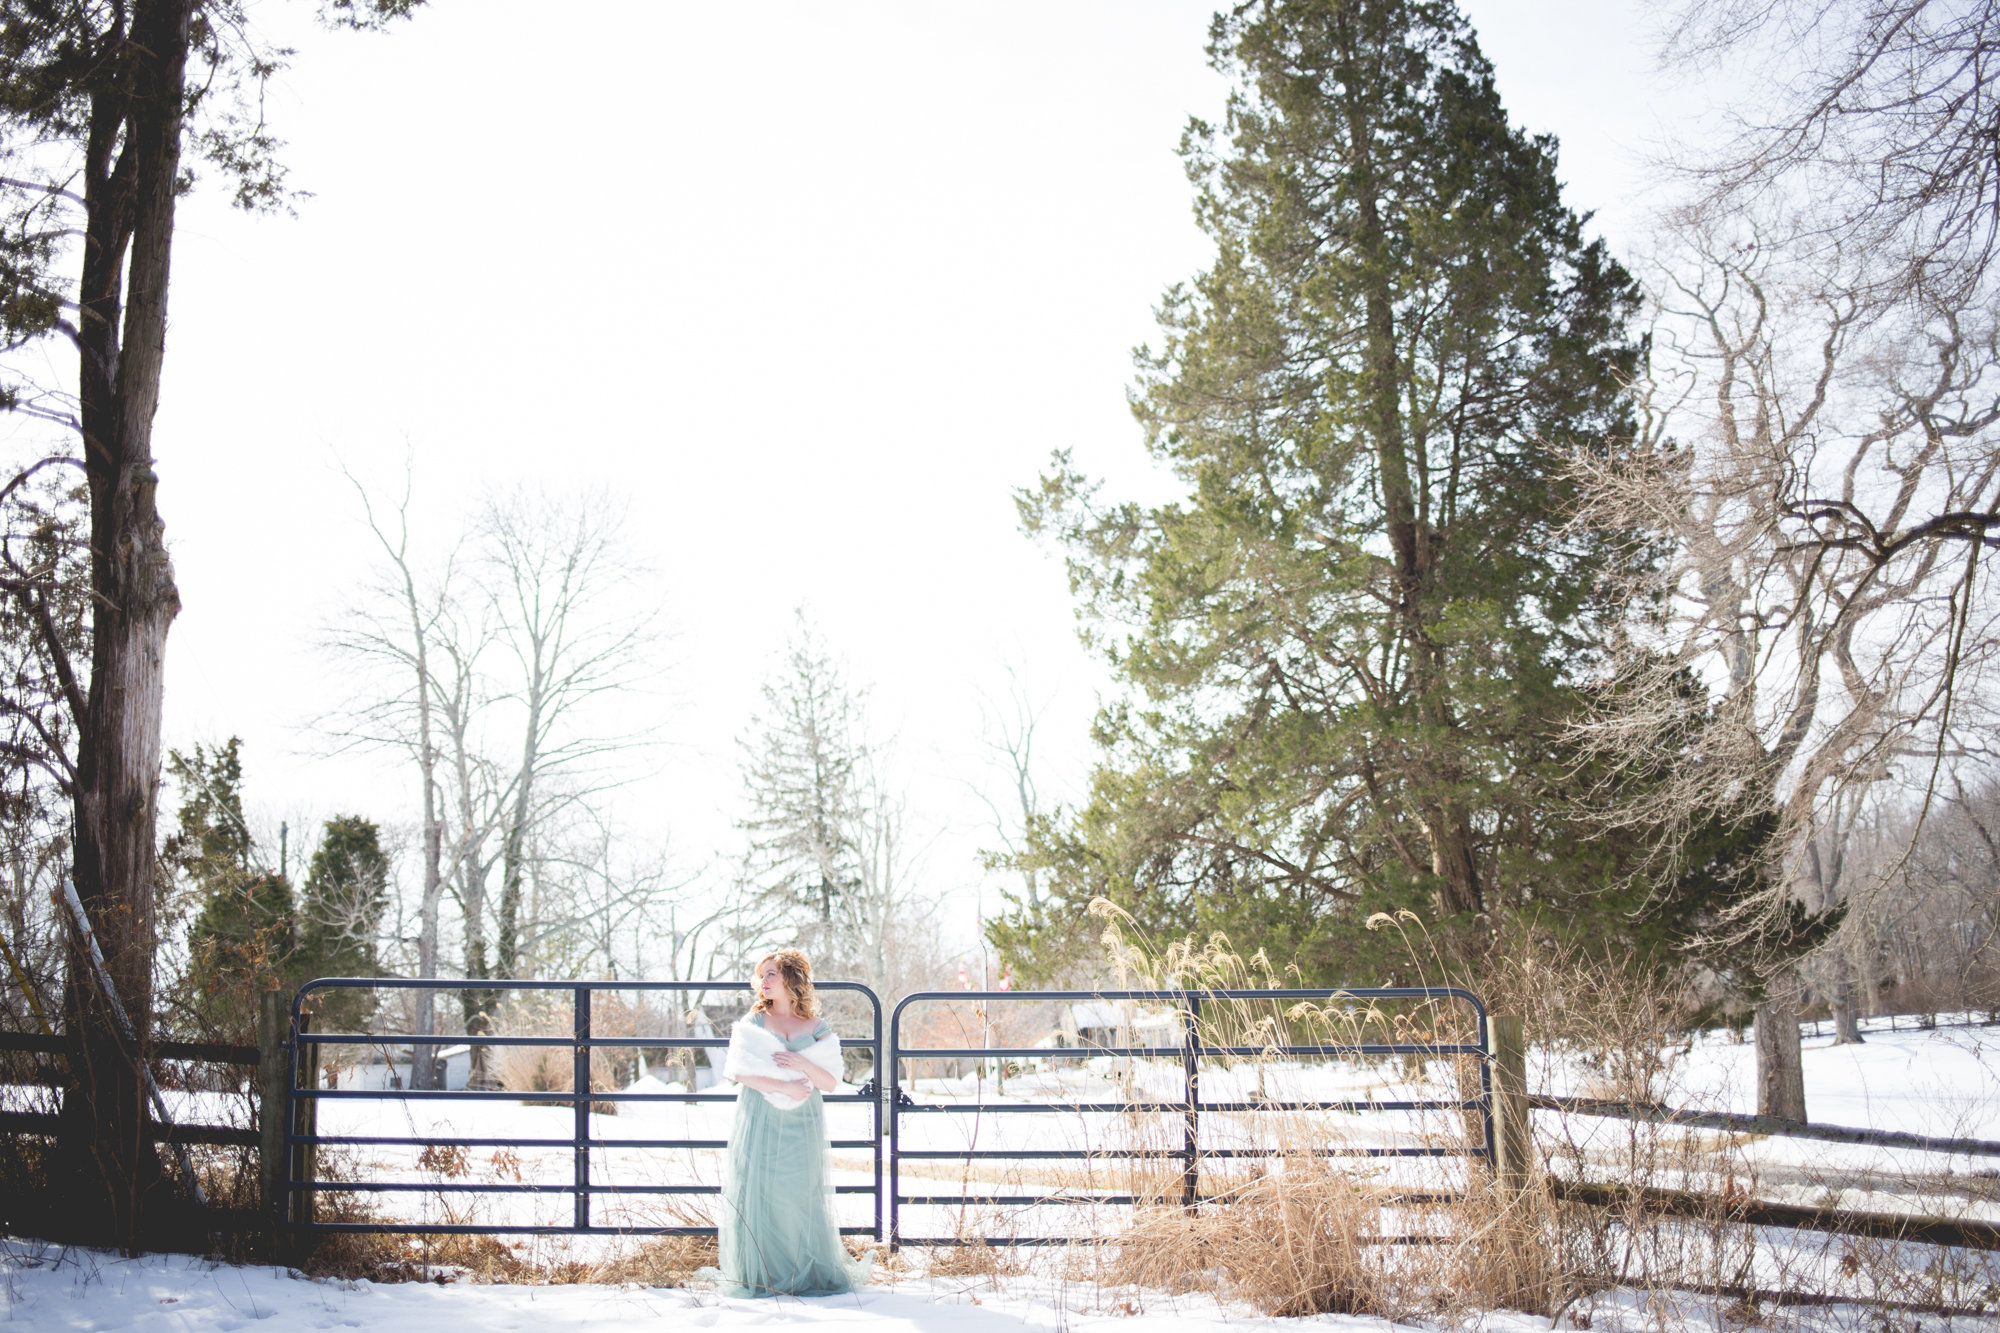 View More: http://katymurrayphotography.pass.us/katie